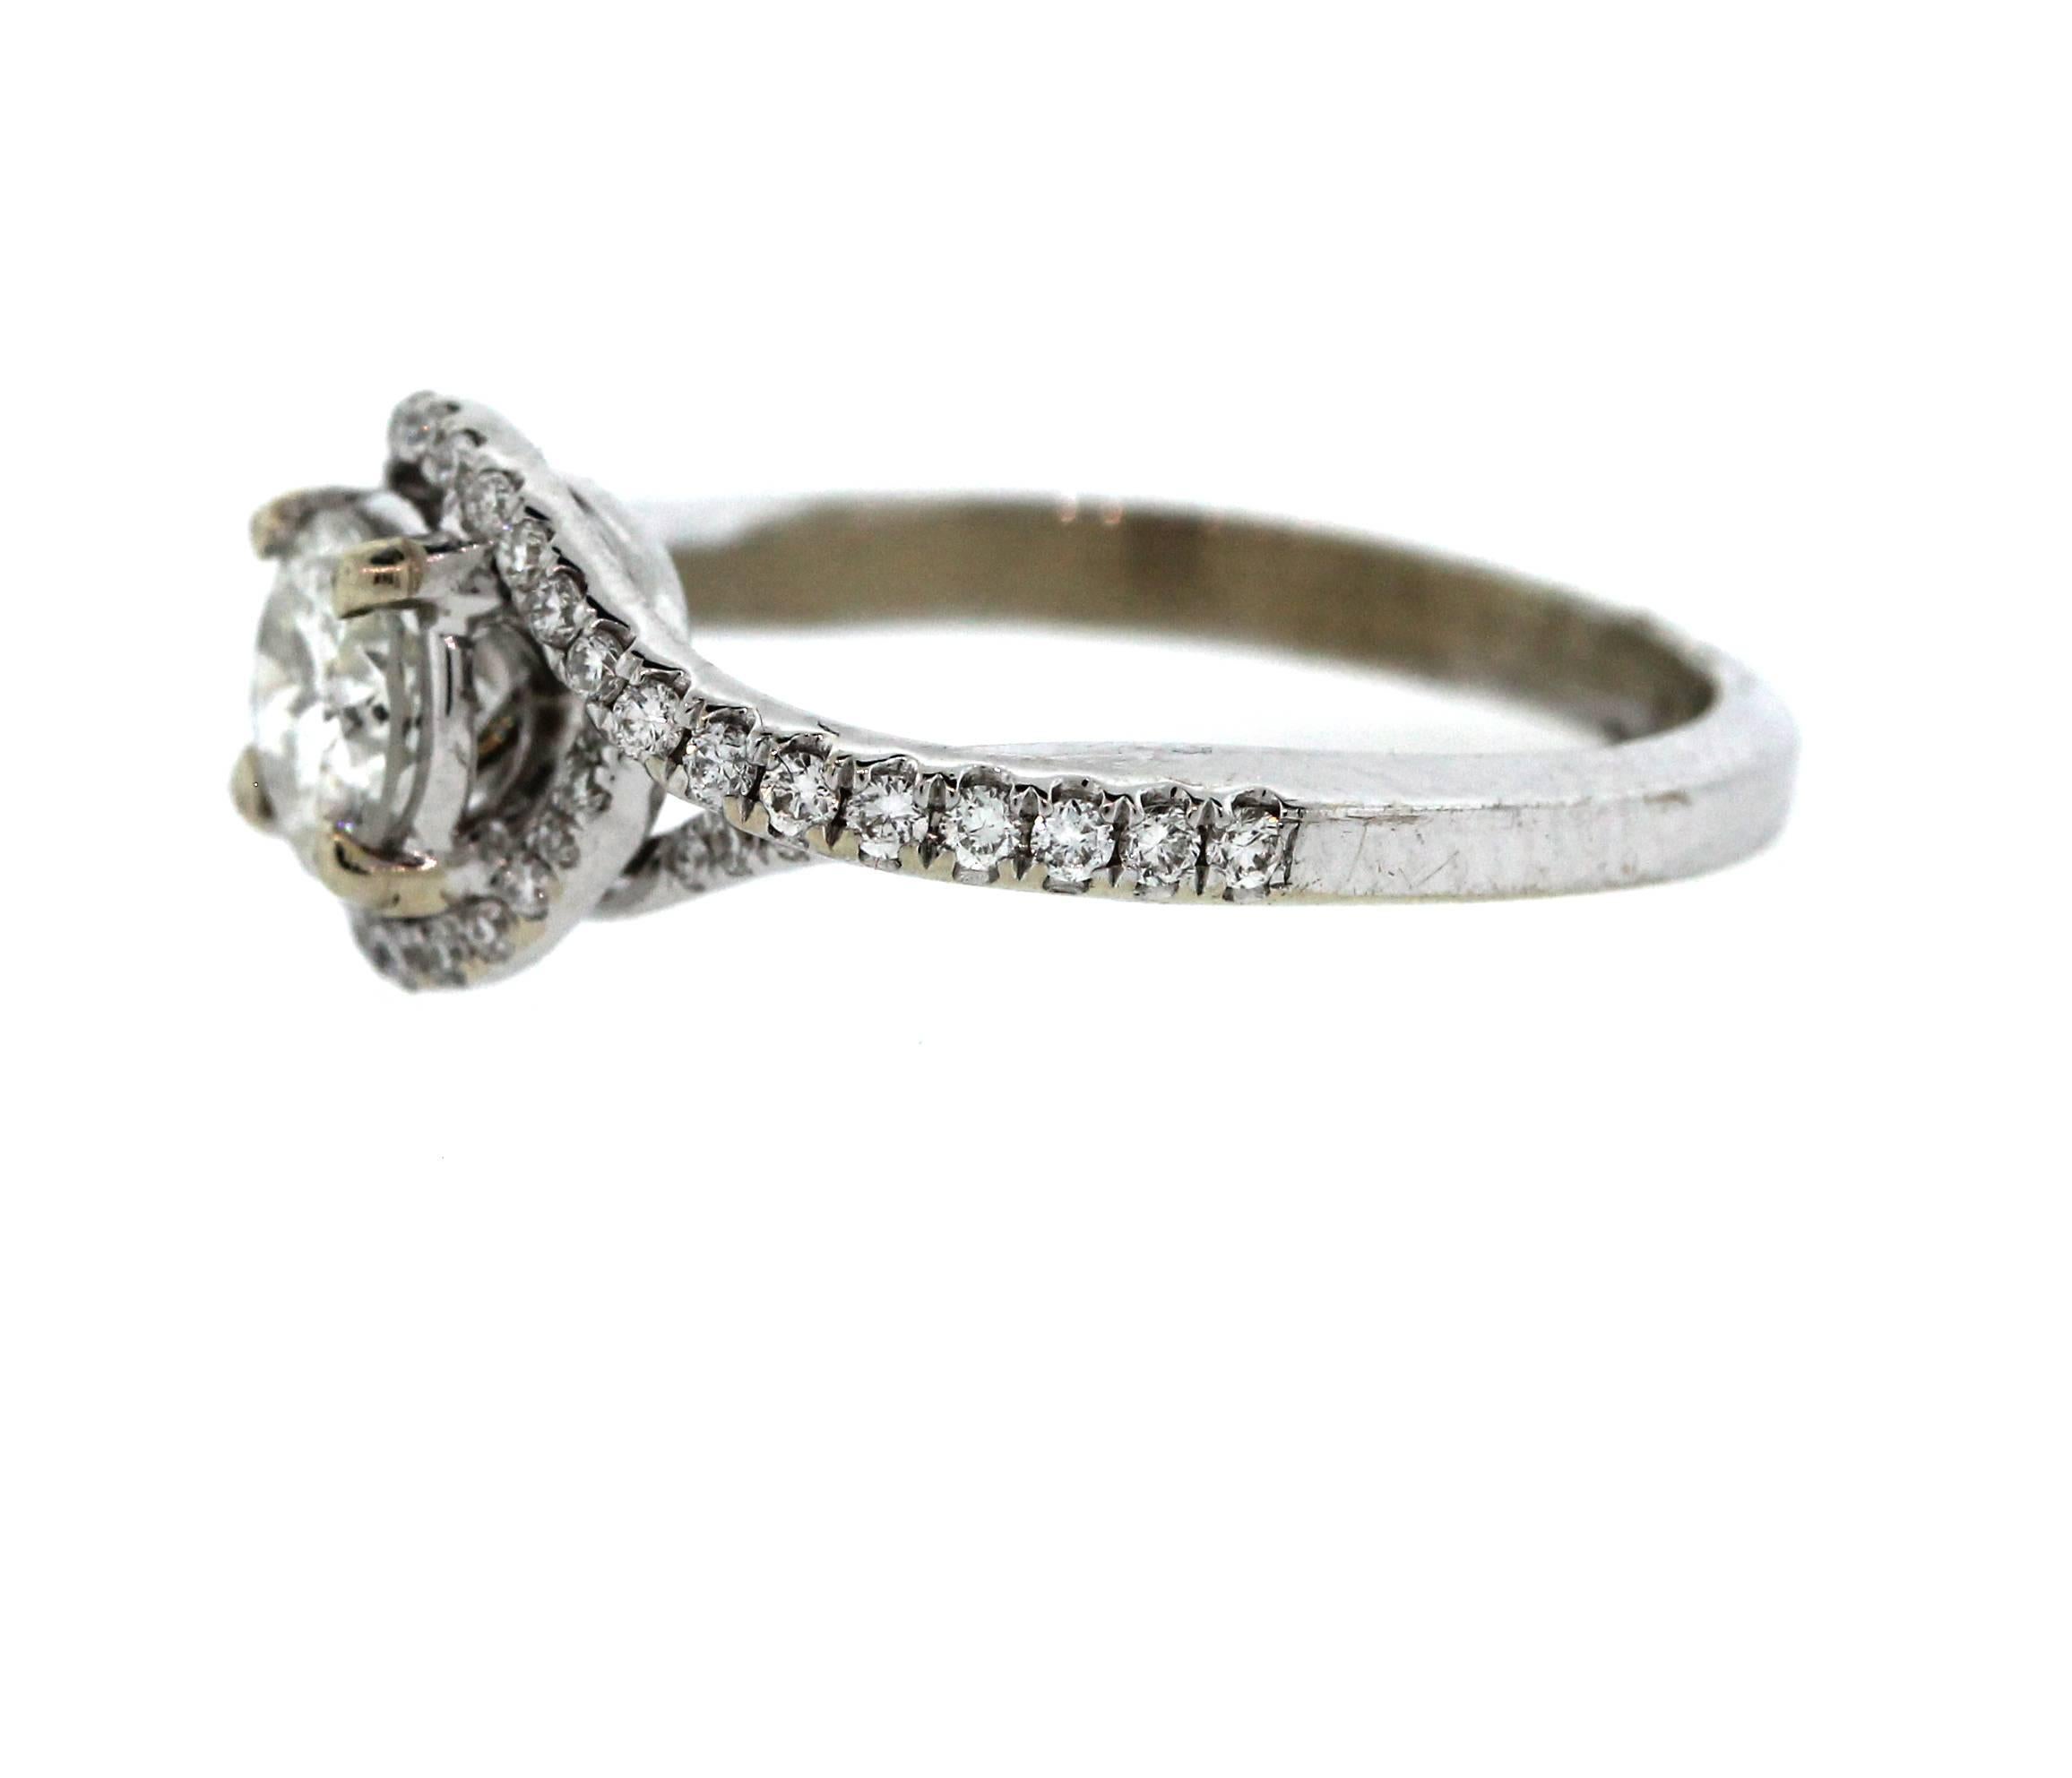 Beautiful 14K White Gold Engagement Ring with 0.65 carat Diamond Center

The center stone is 0.65 Carat K Color, I3 Clarity

0.45 ct. Diamonds make up the sides of ring and around center

Ring is currently size 6, sizable. 

Weights 4 grams